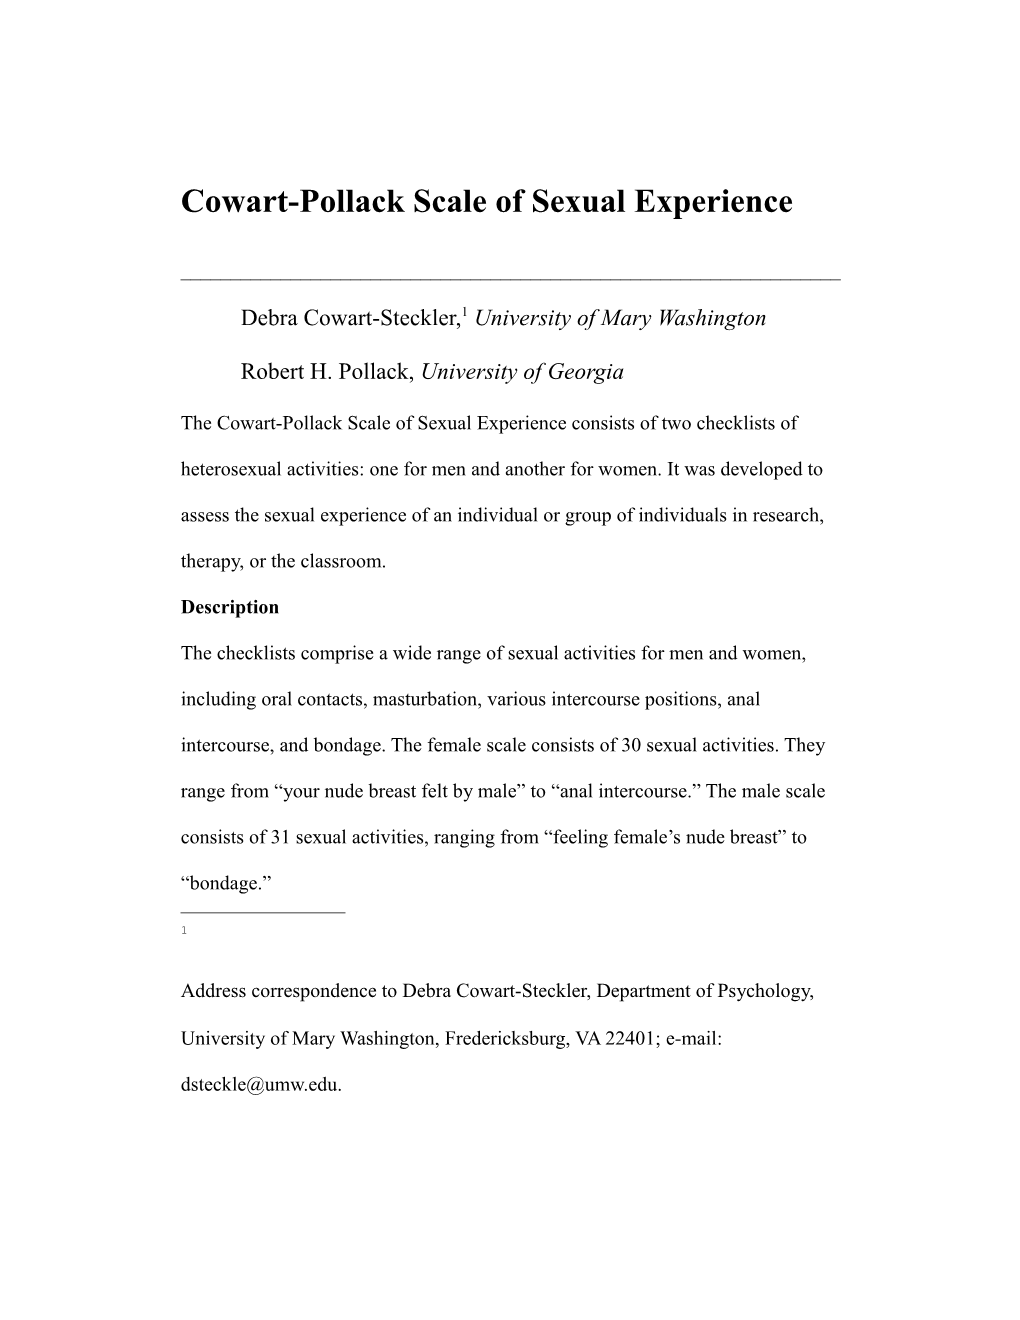 The Cowart Pollack Scale of Sexual Experience